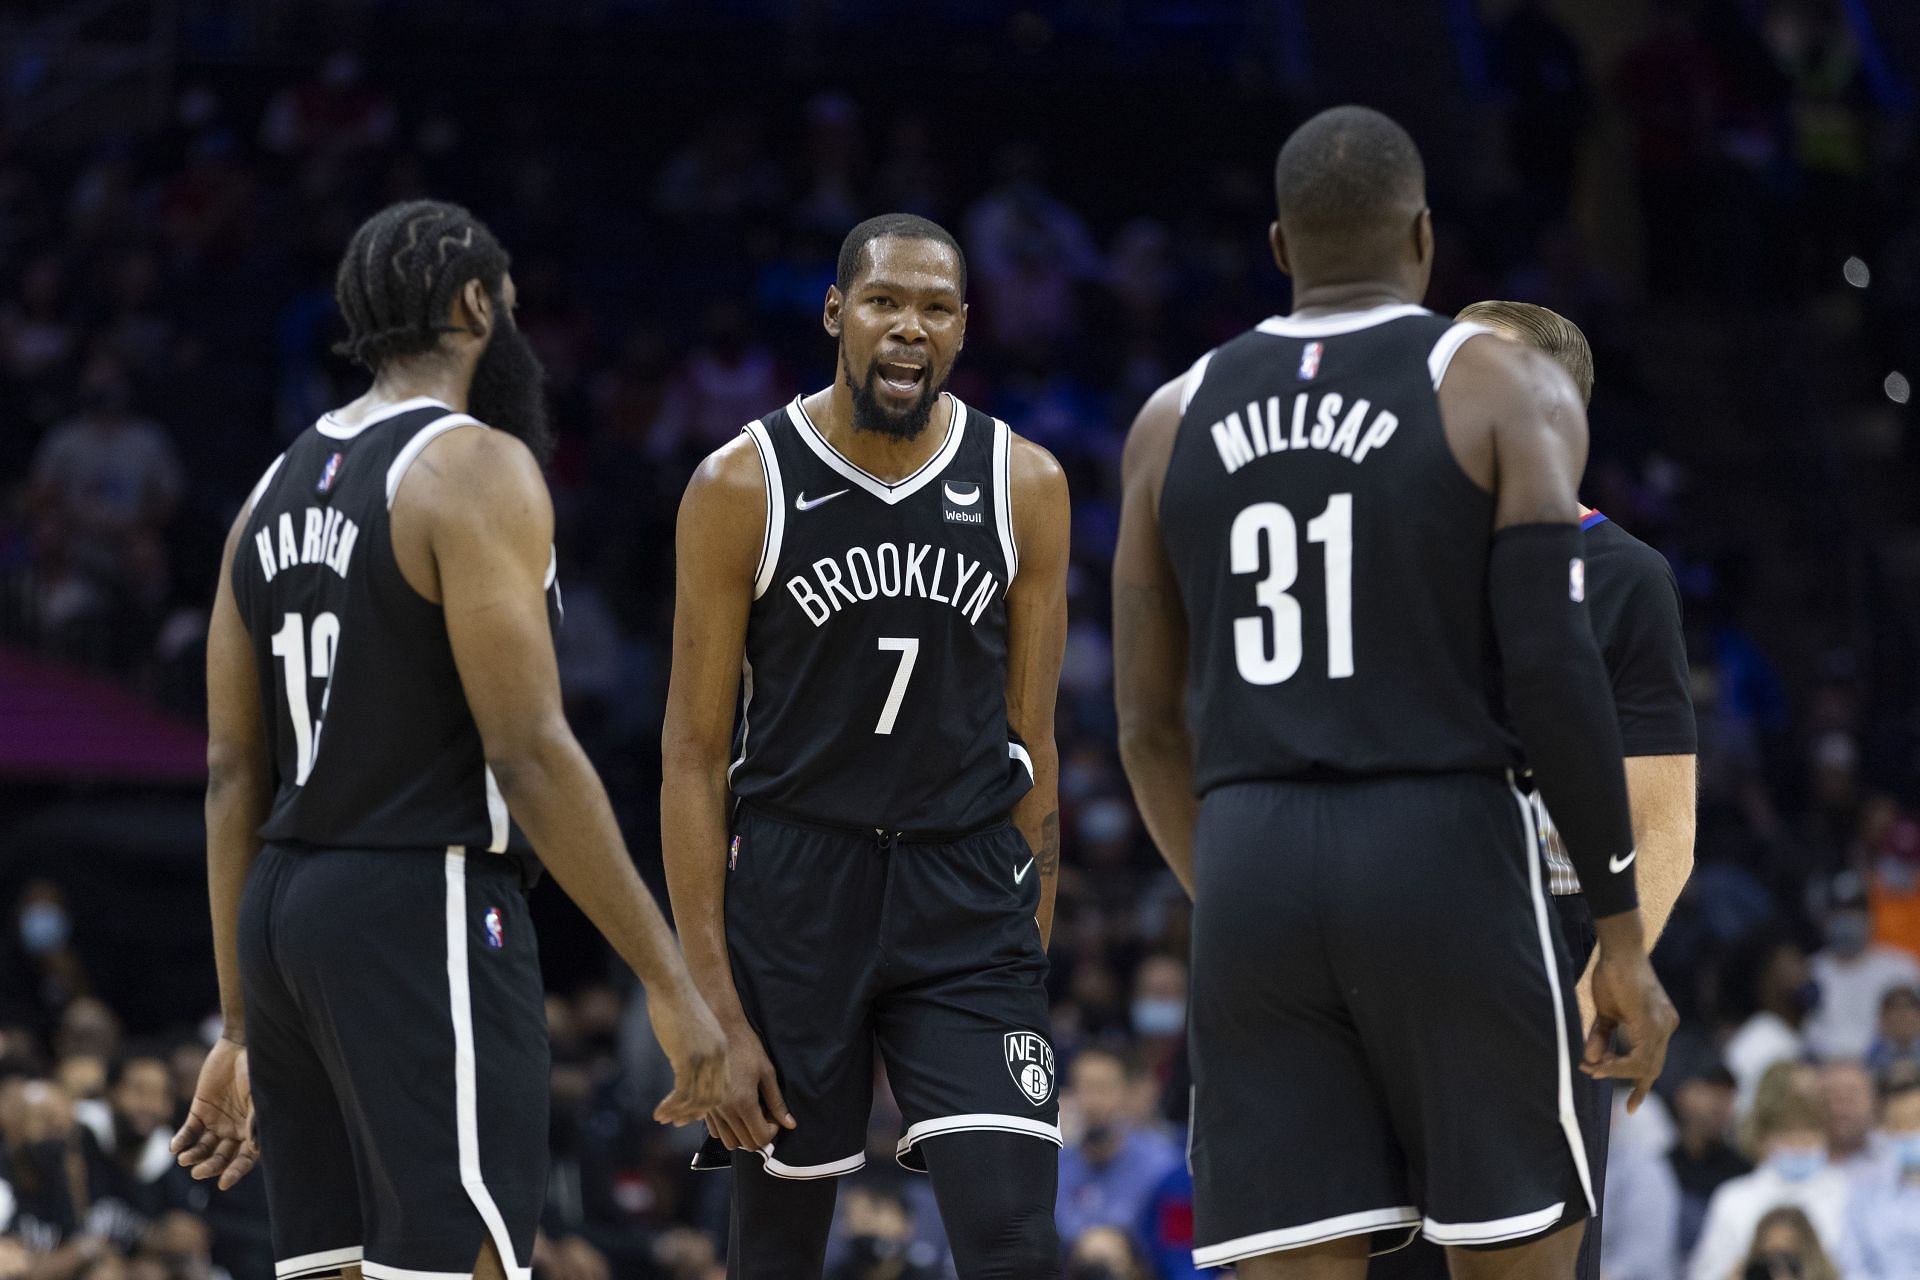 The Brooklyn Nets are leaning on their defense to correct a shaky start to the season